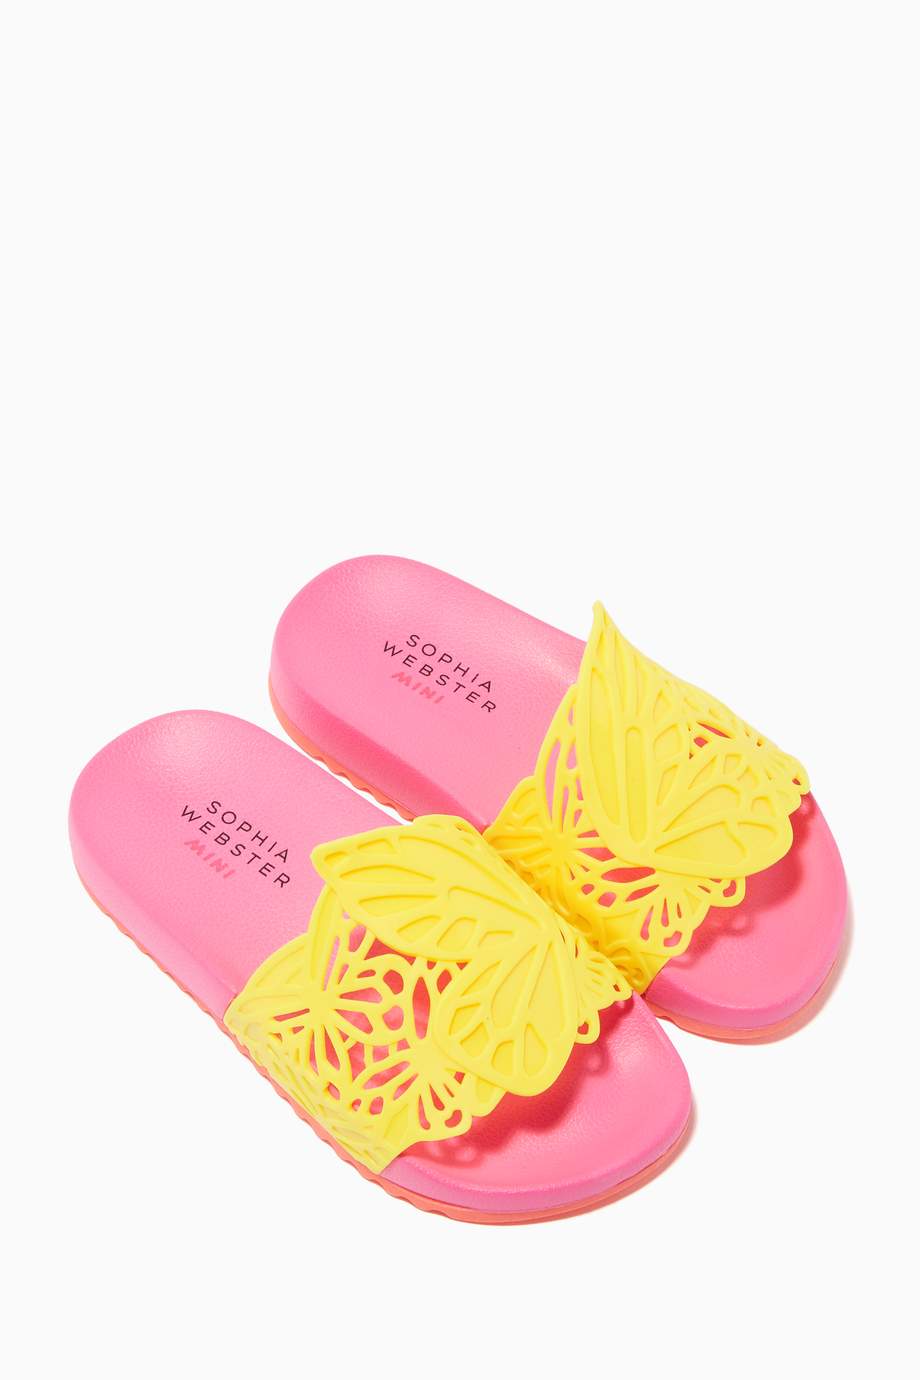 shop-sophia-webster-pink-pink-yellow-lia-butterfly-slides-for-kids